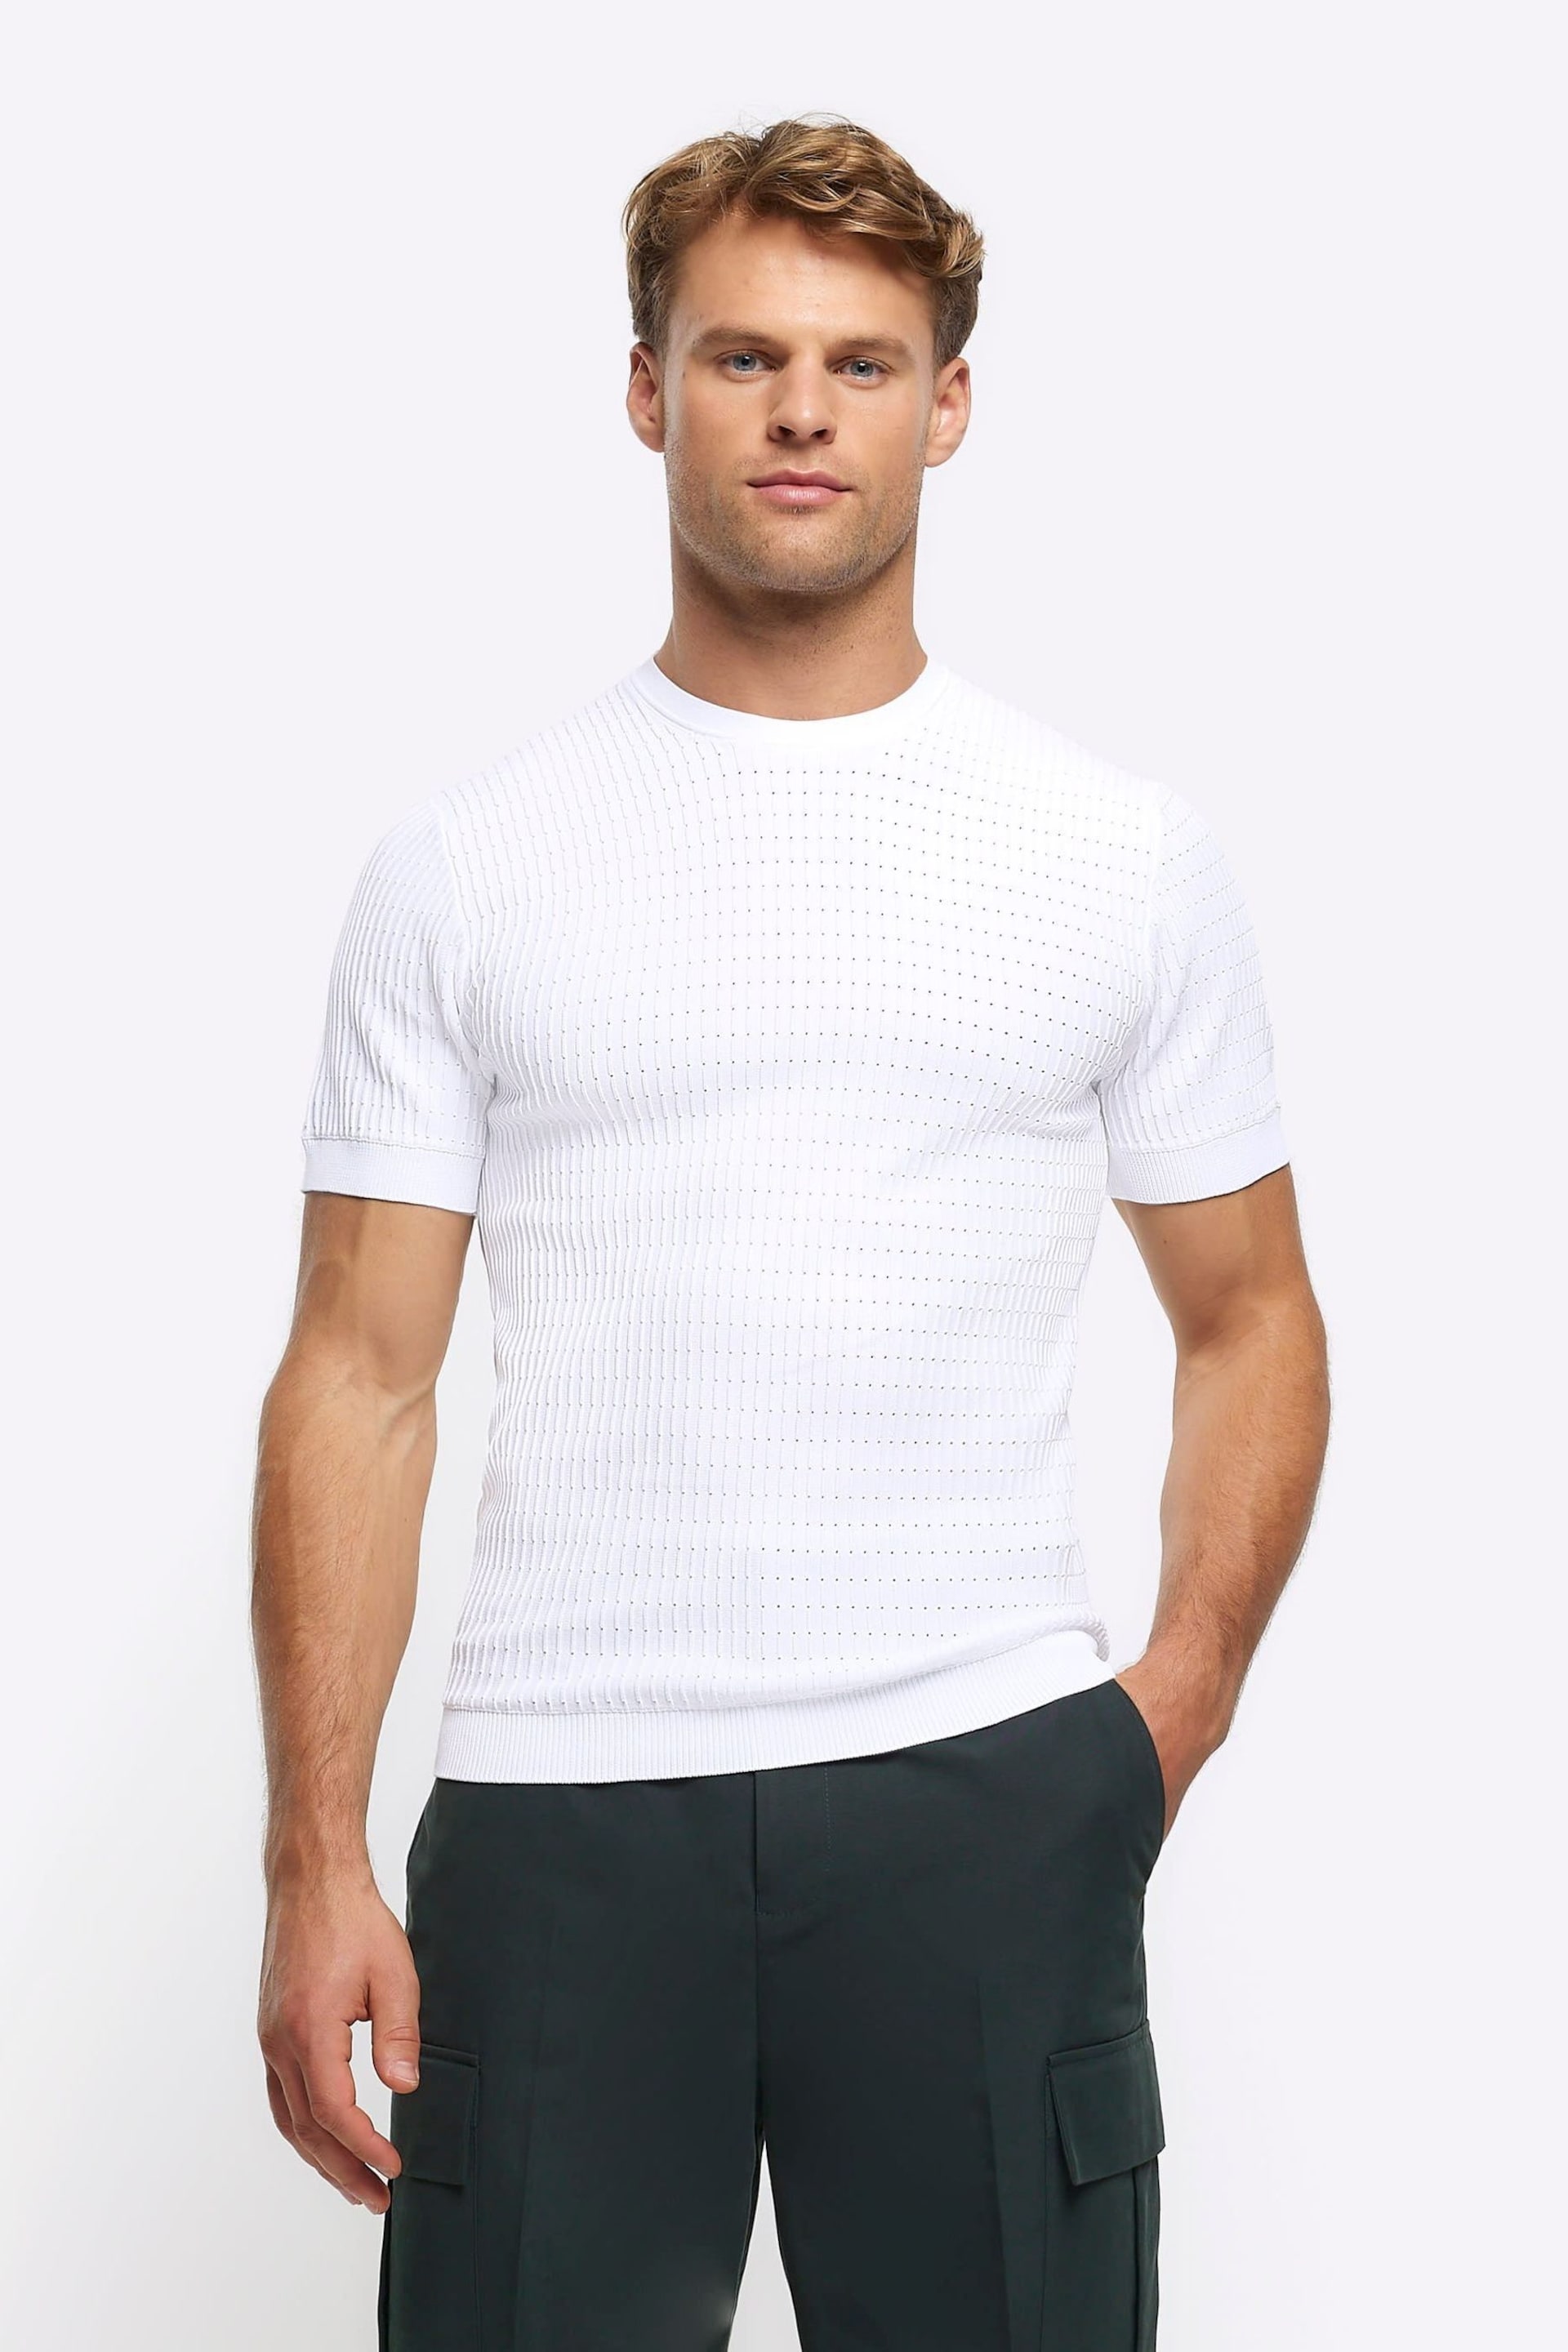 River Island White Muscle Fit Brick T-Shirt - Image 1 of 4